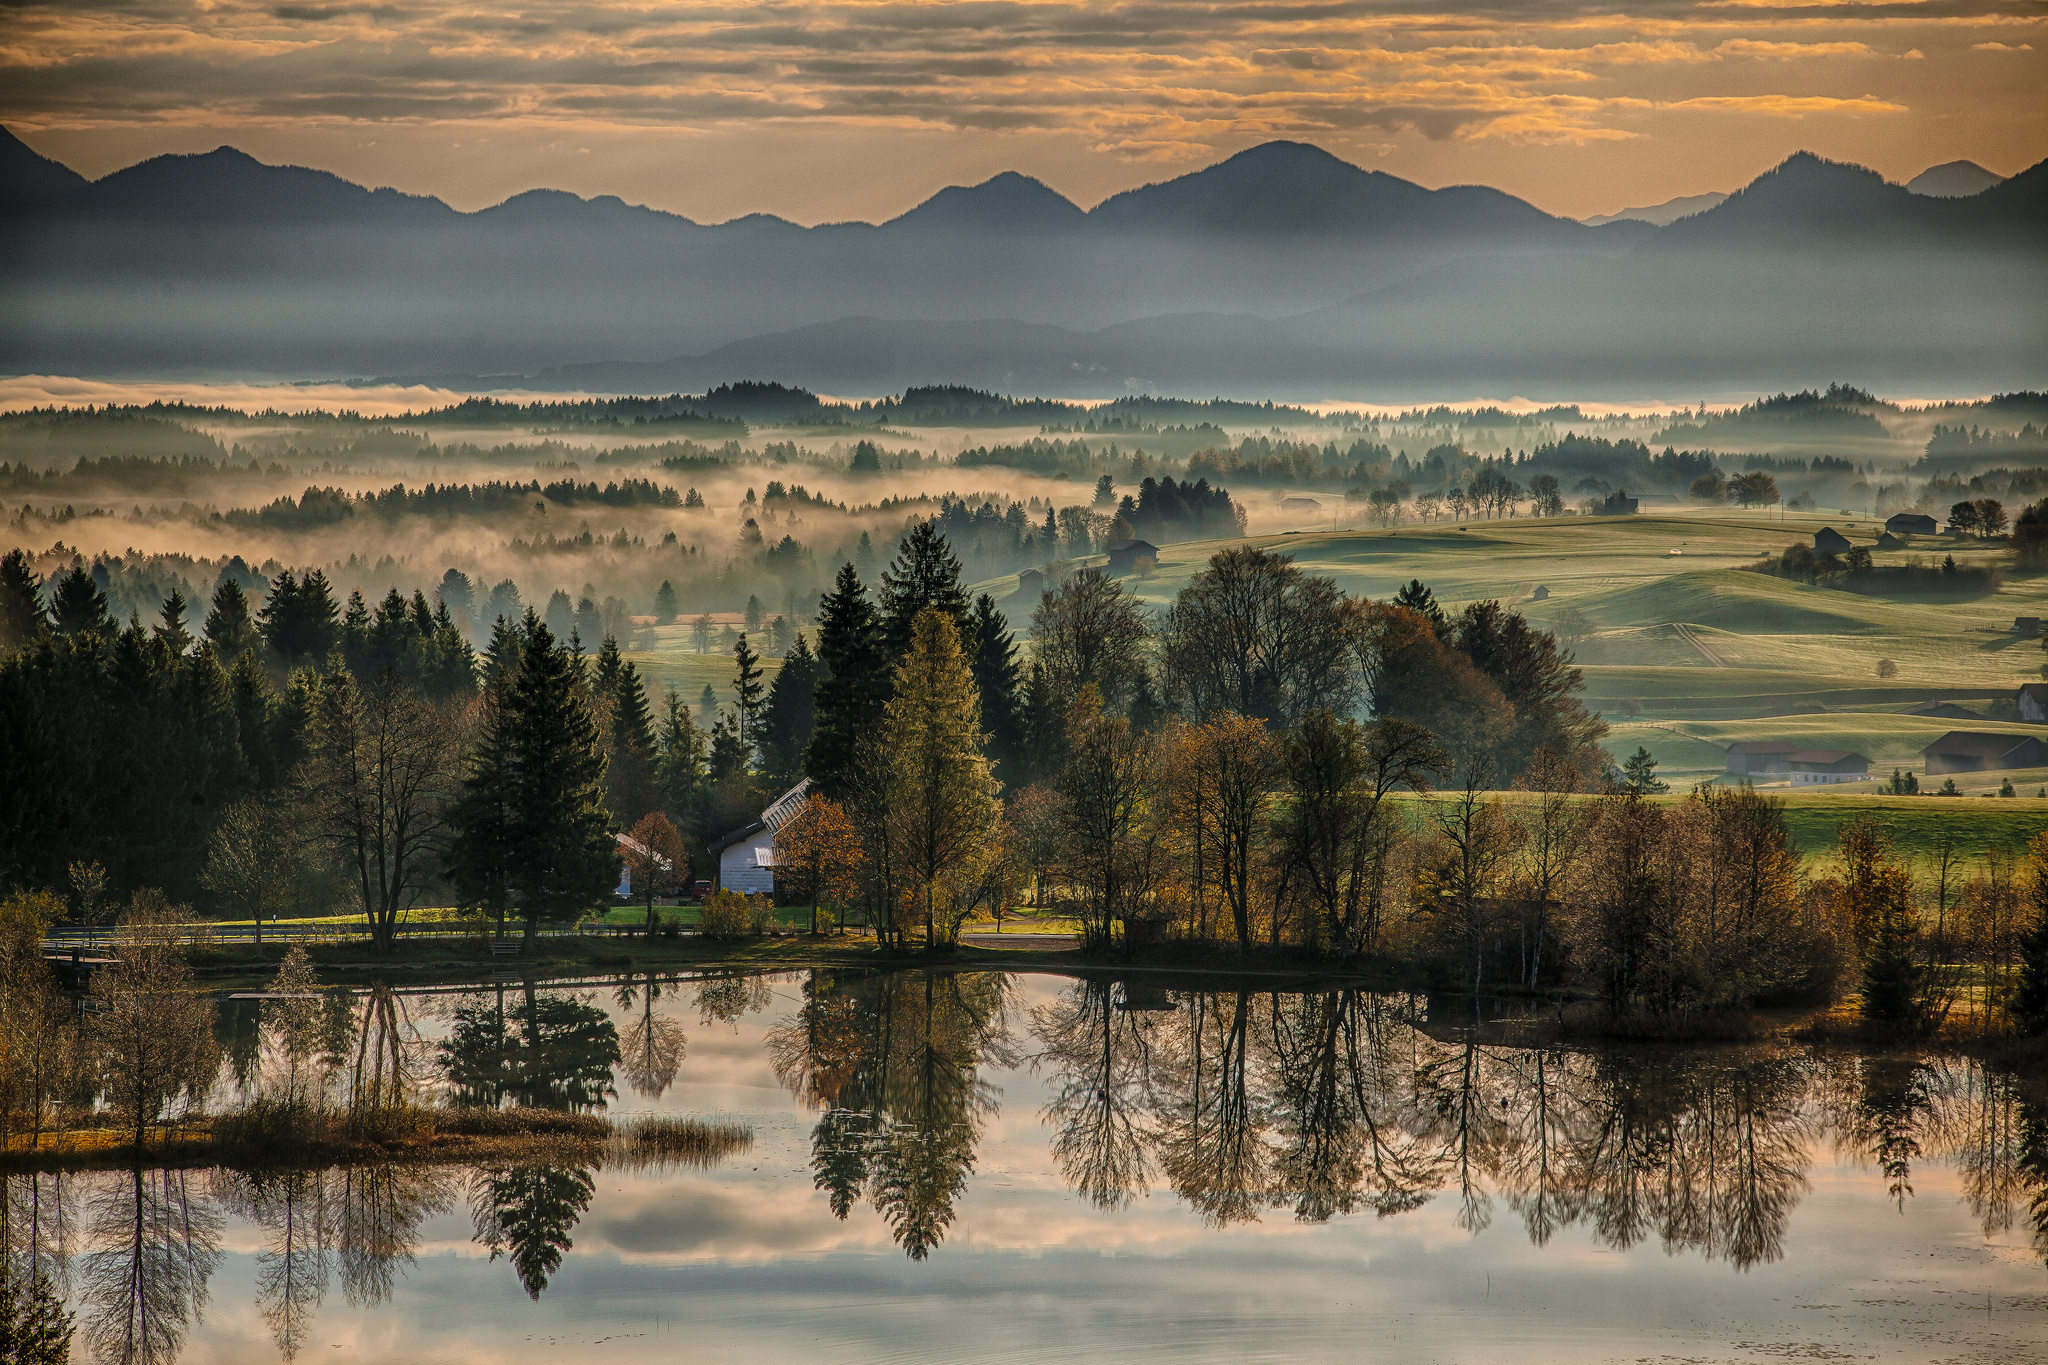 bavaria, Germany, Autumn, River, Morning, Dawn, Reflection, Trees, Mountains, Landscape Wallpaper